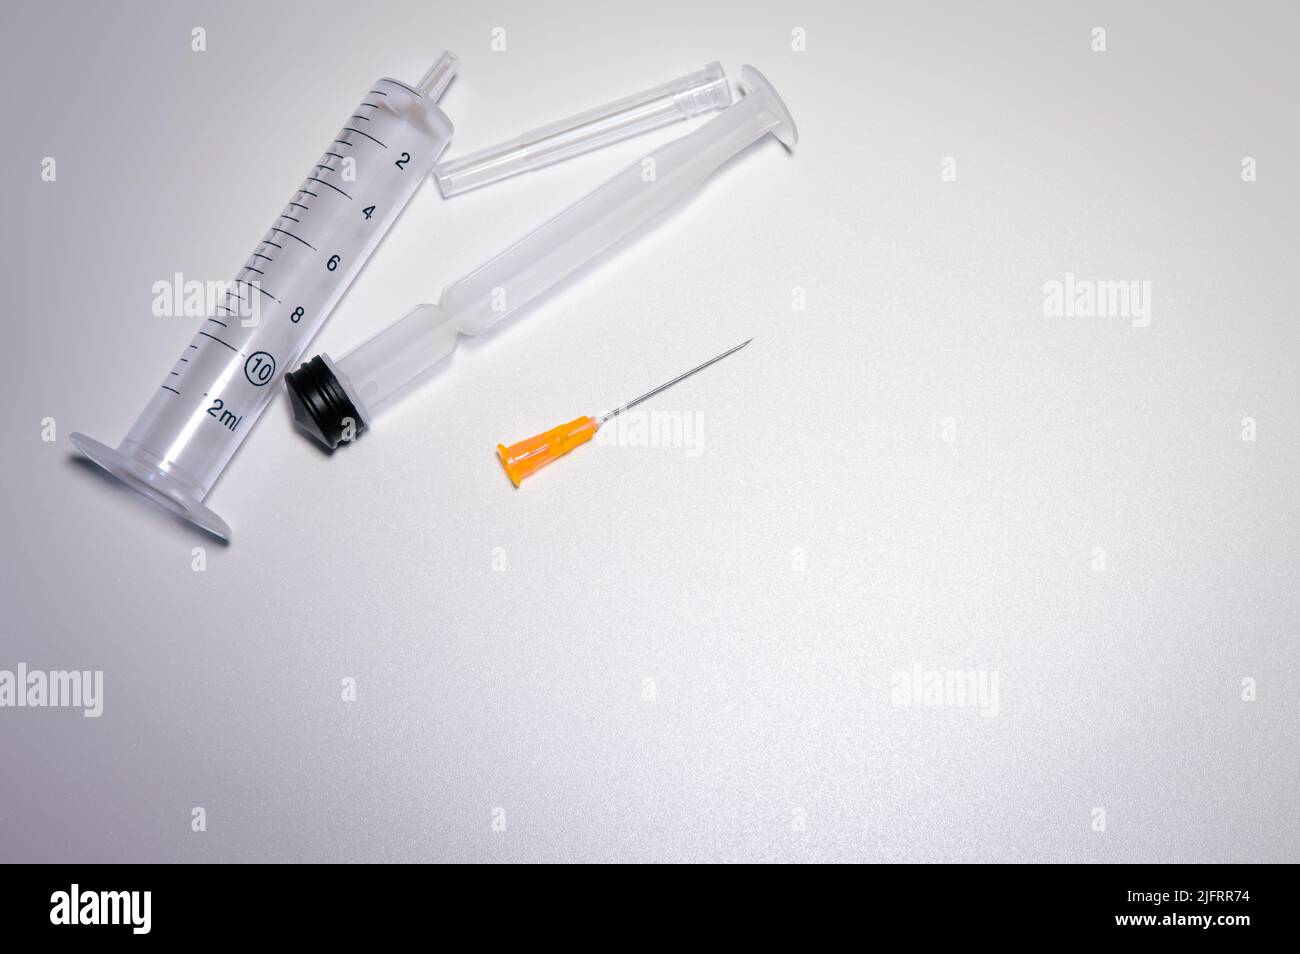 Parts of a medical syringe with a bright orange needle. Space for text. Pharmaceutical images with copy space. Stock Photo